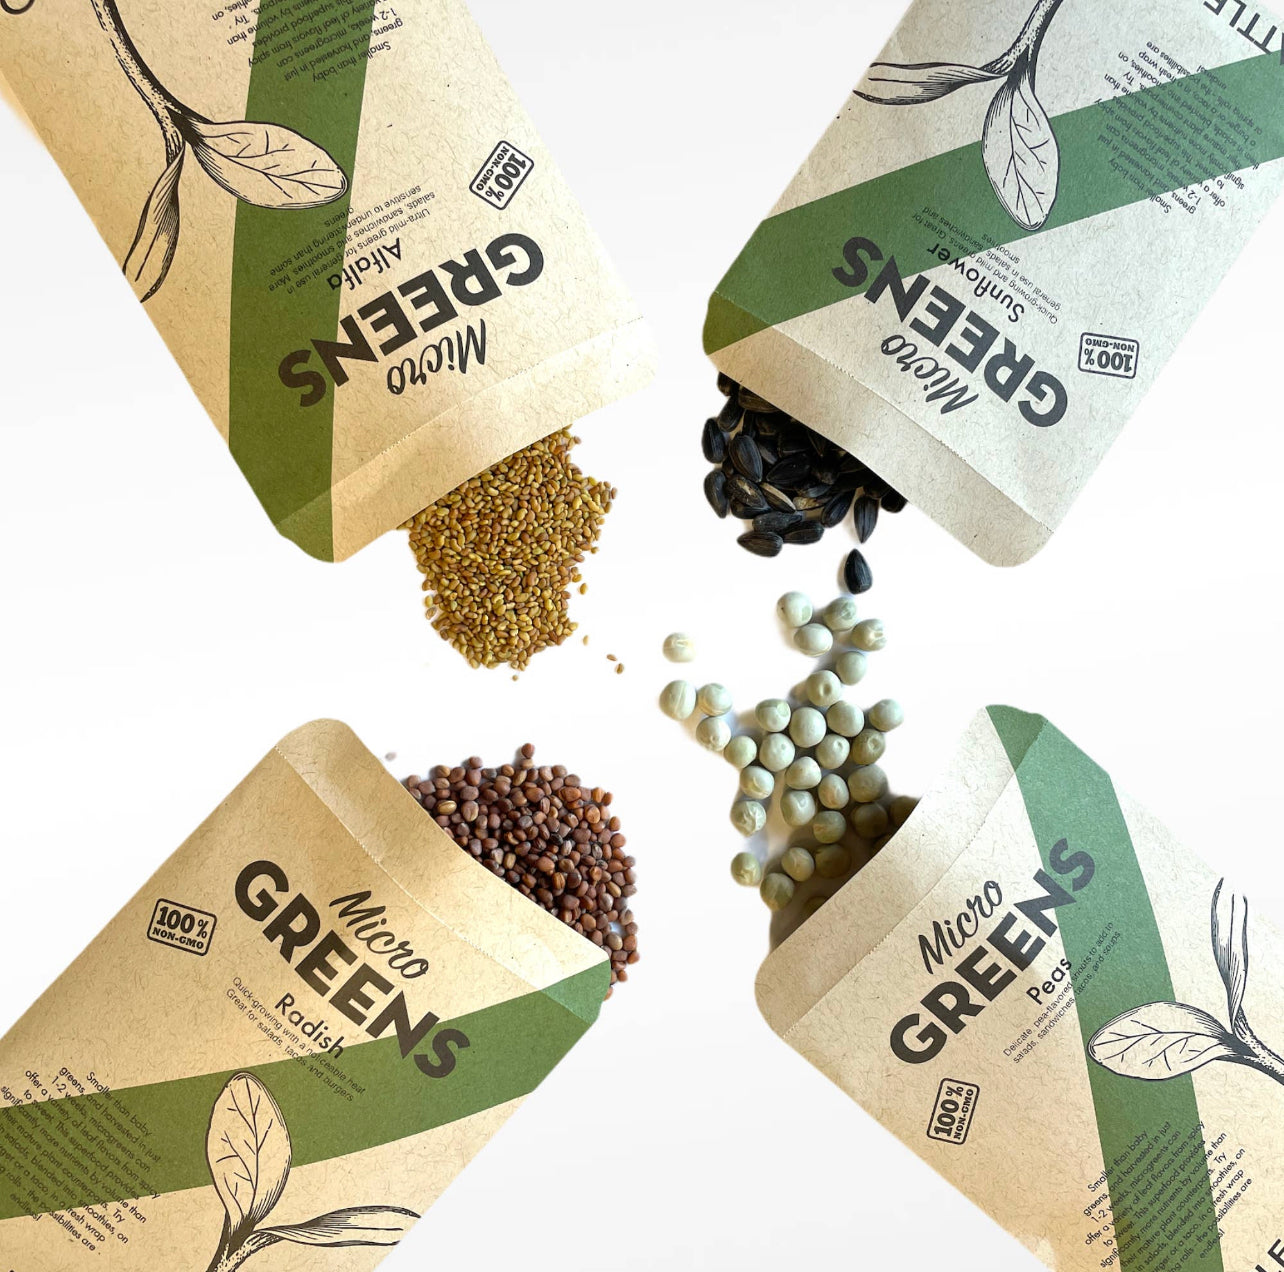 Seattle Seed Co. - Non-GMO Microgreens Sampler Pack